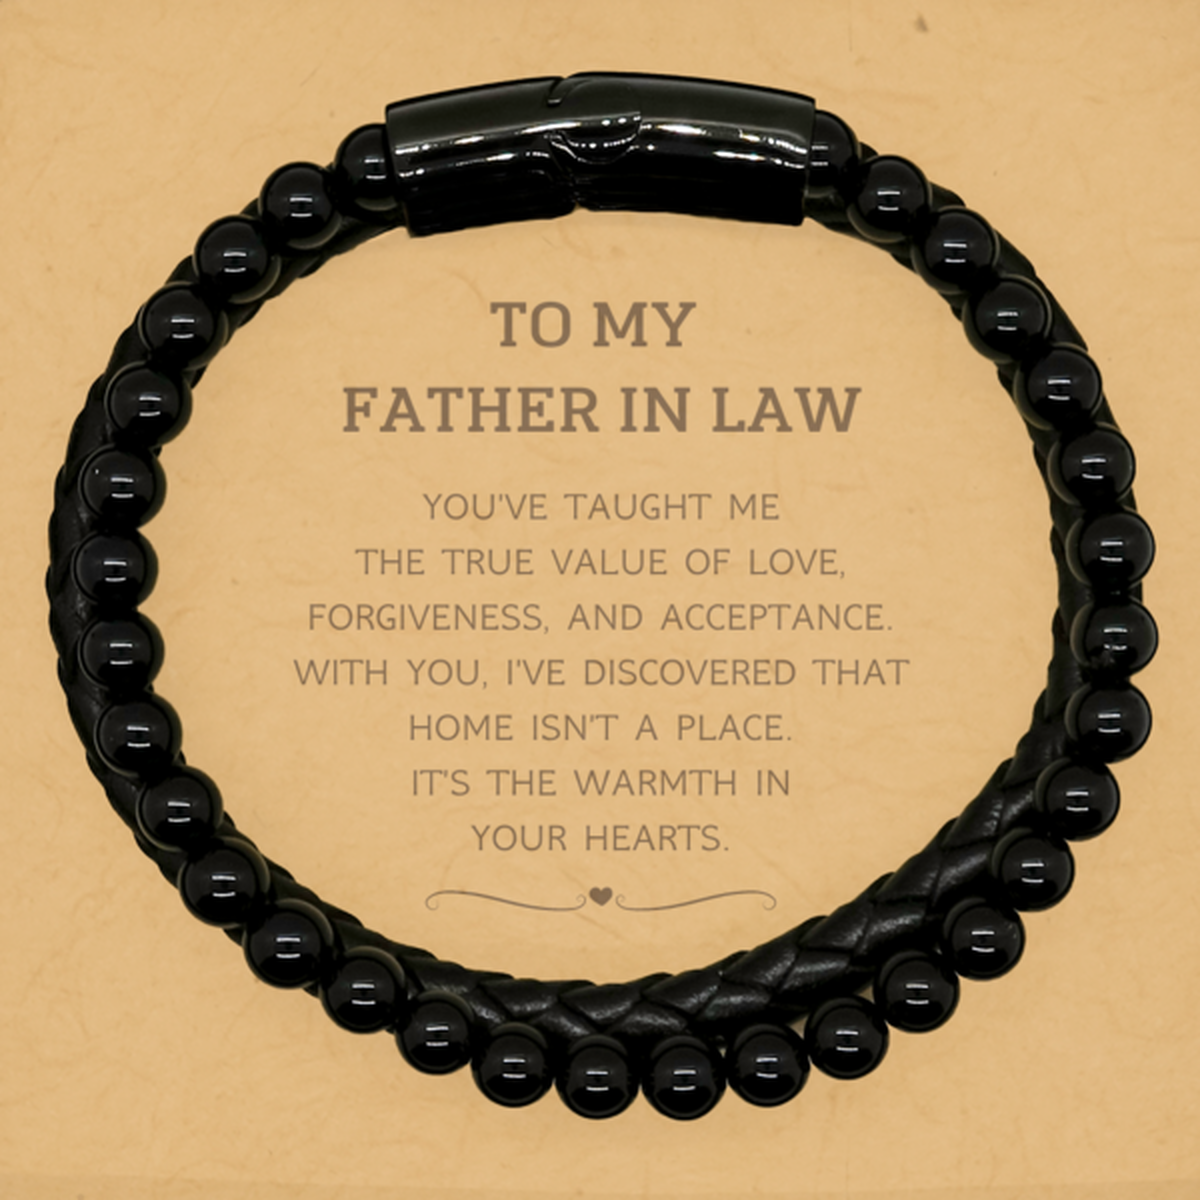 To My Father In Law Gifts, You've taught me the true value of love, Thank You Gifts For Father In Law, Birthday Stone Leather Bracelets For Father In Law